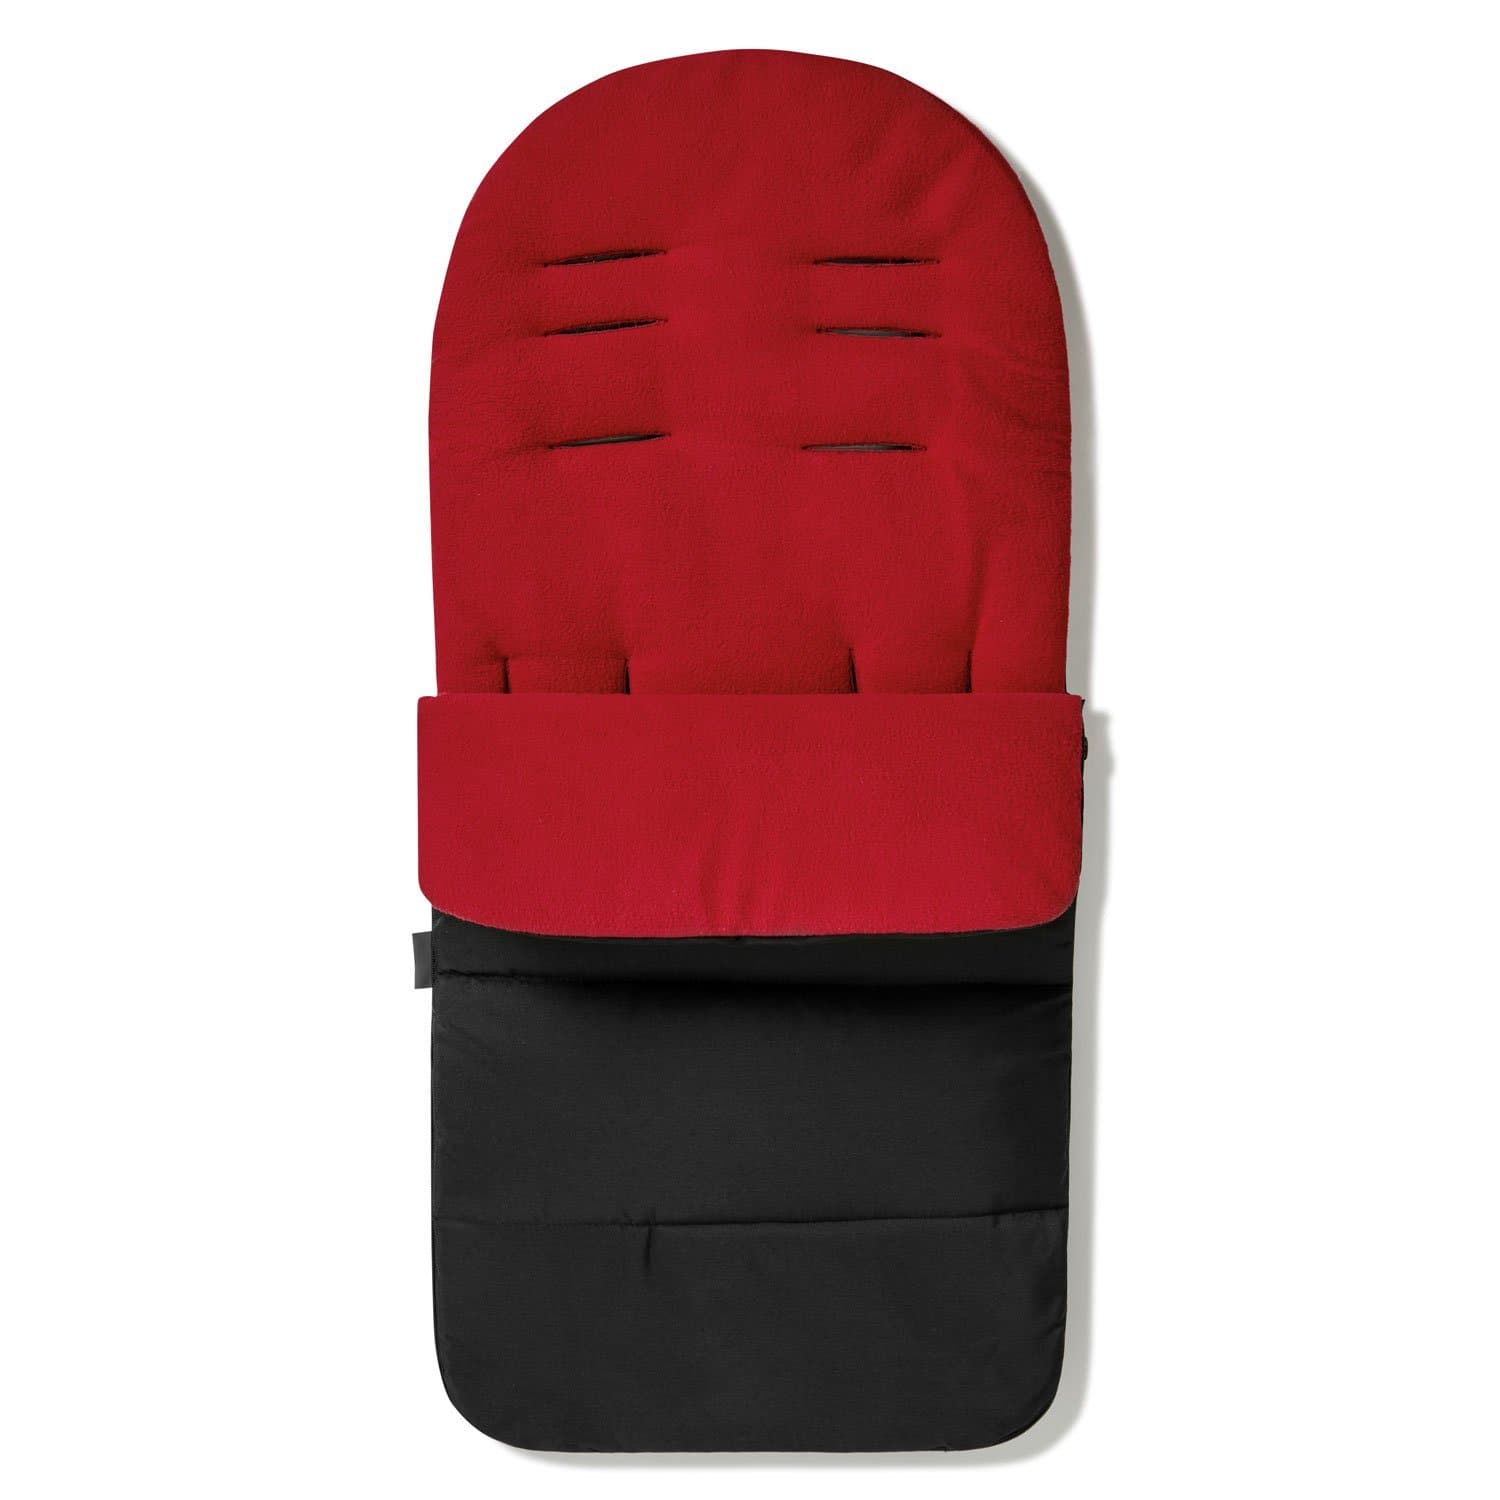 Premium Footmuff / Cosy Toes Compatible with Egg - Fire Red / Fits All Models | For Your Little One